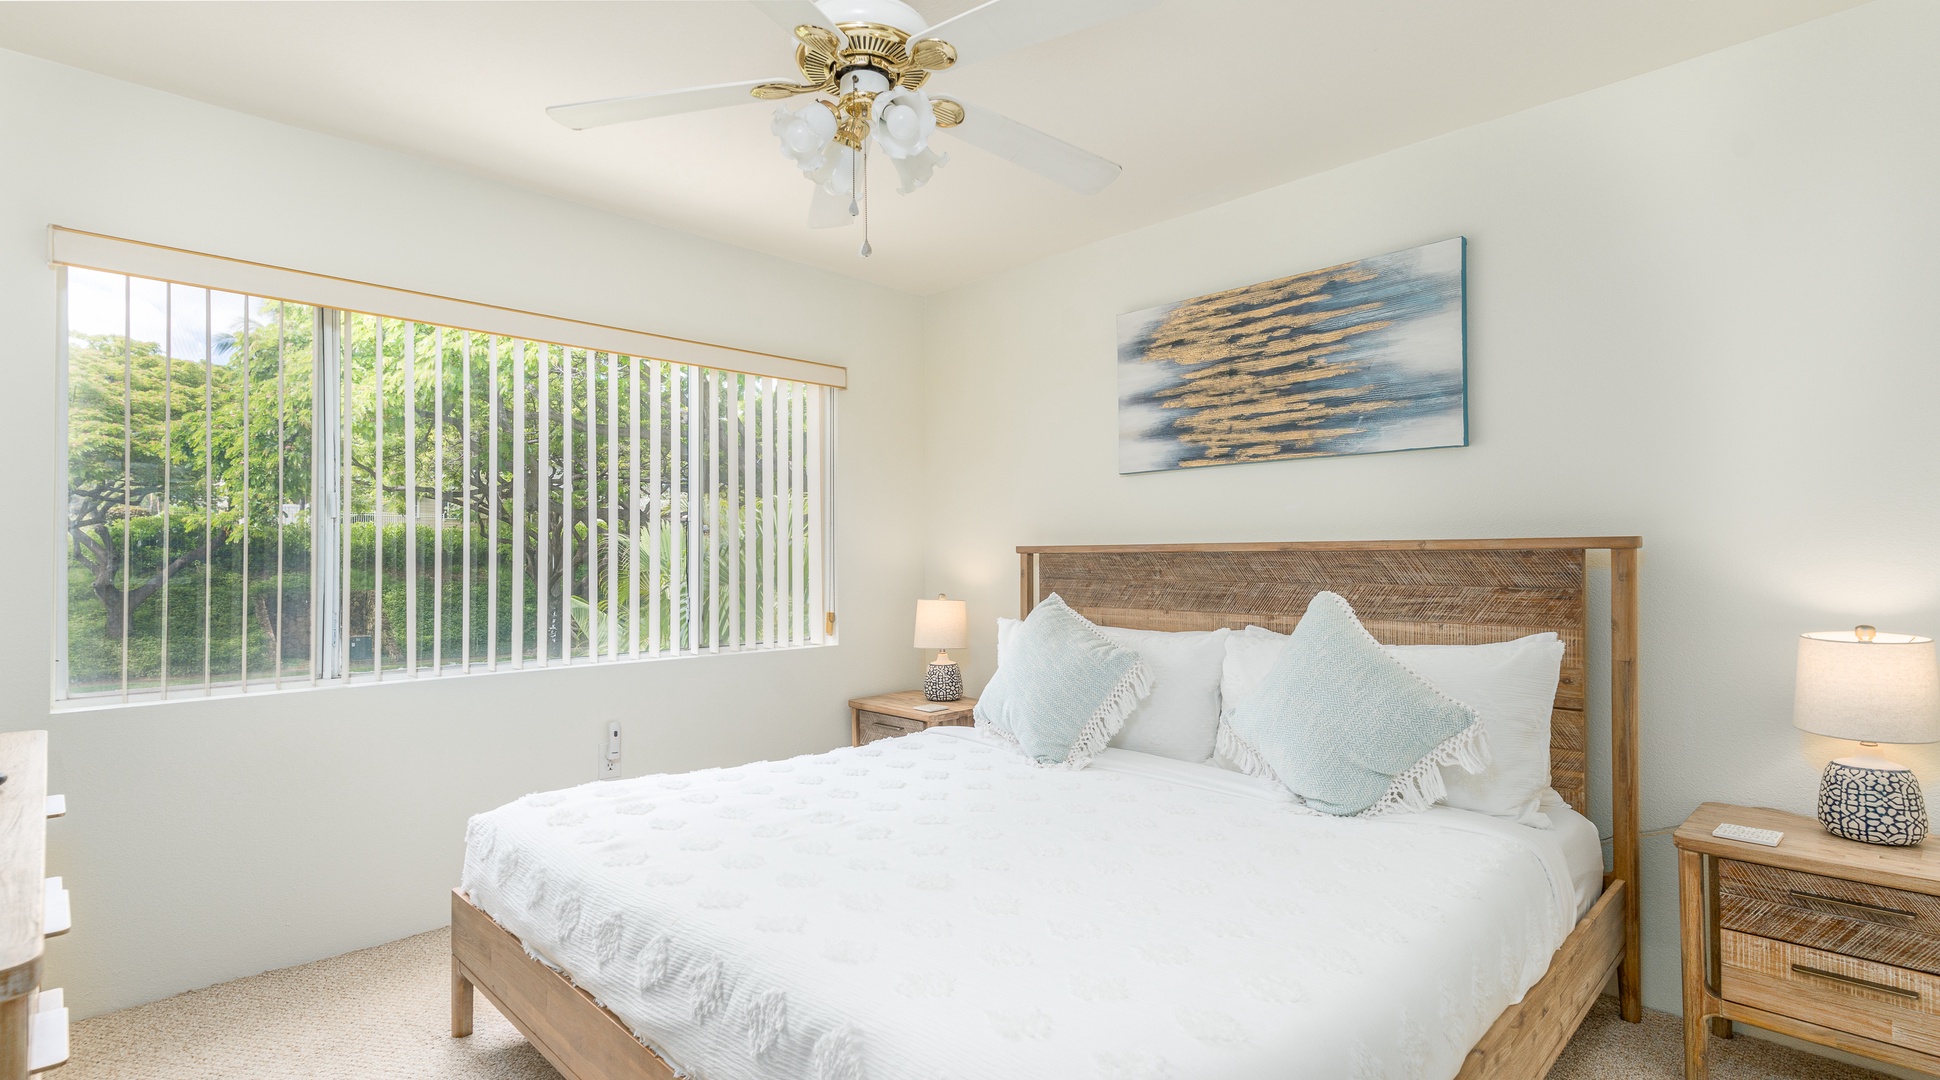 Kapolei Vacation Rentals, Fairways at Ko Olina 27H - Wake up to scenery and luxurious linens in this king bed in the primary guest bedroom.